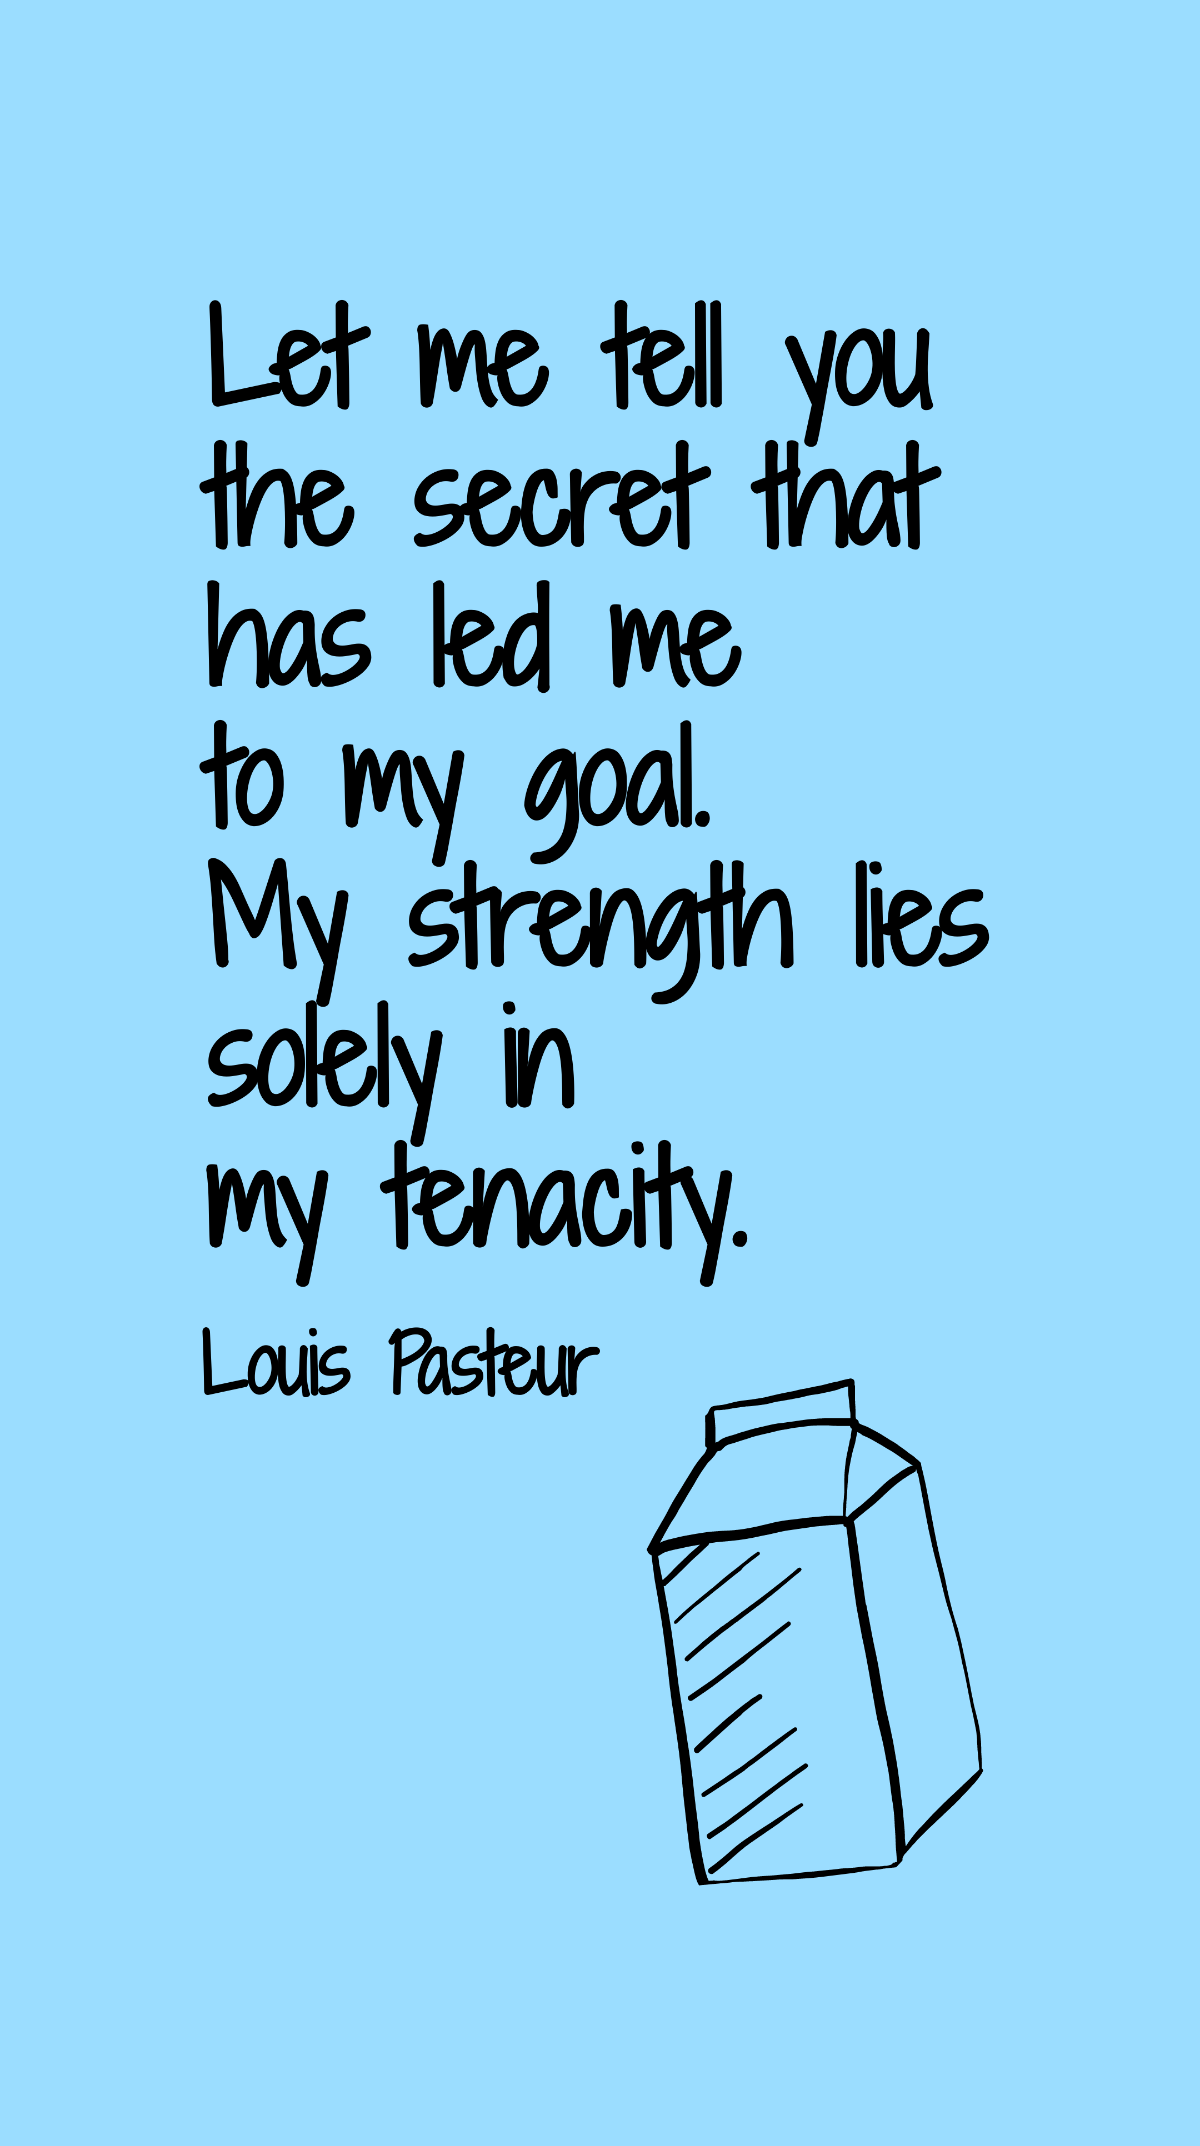 Louis Pasteur - Let me tell you the secret that has led me to my goal. My strength lies solely in my tenacity. Template